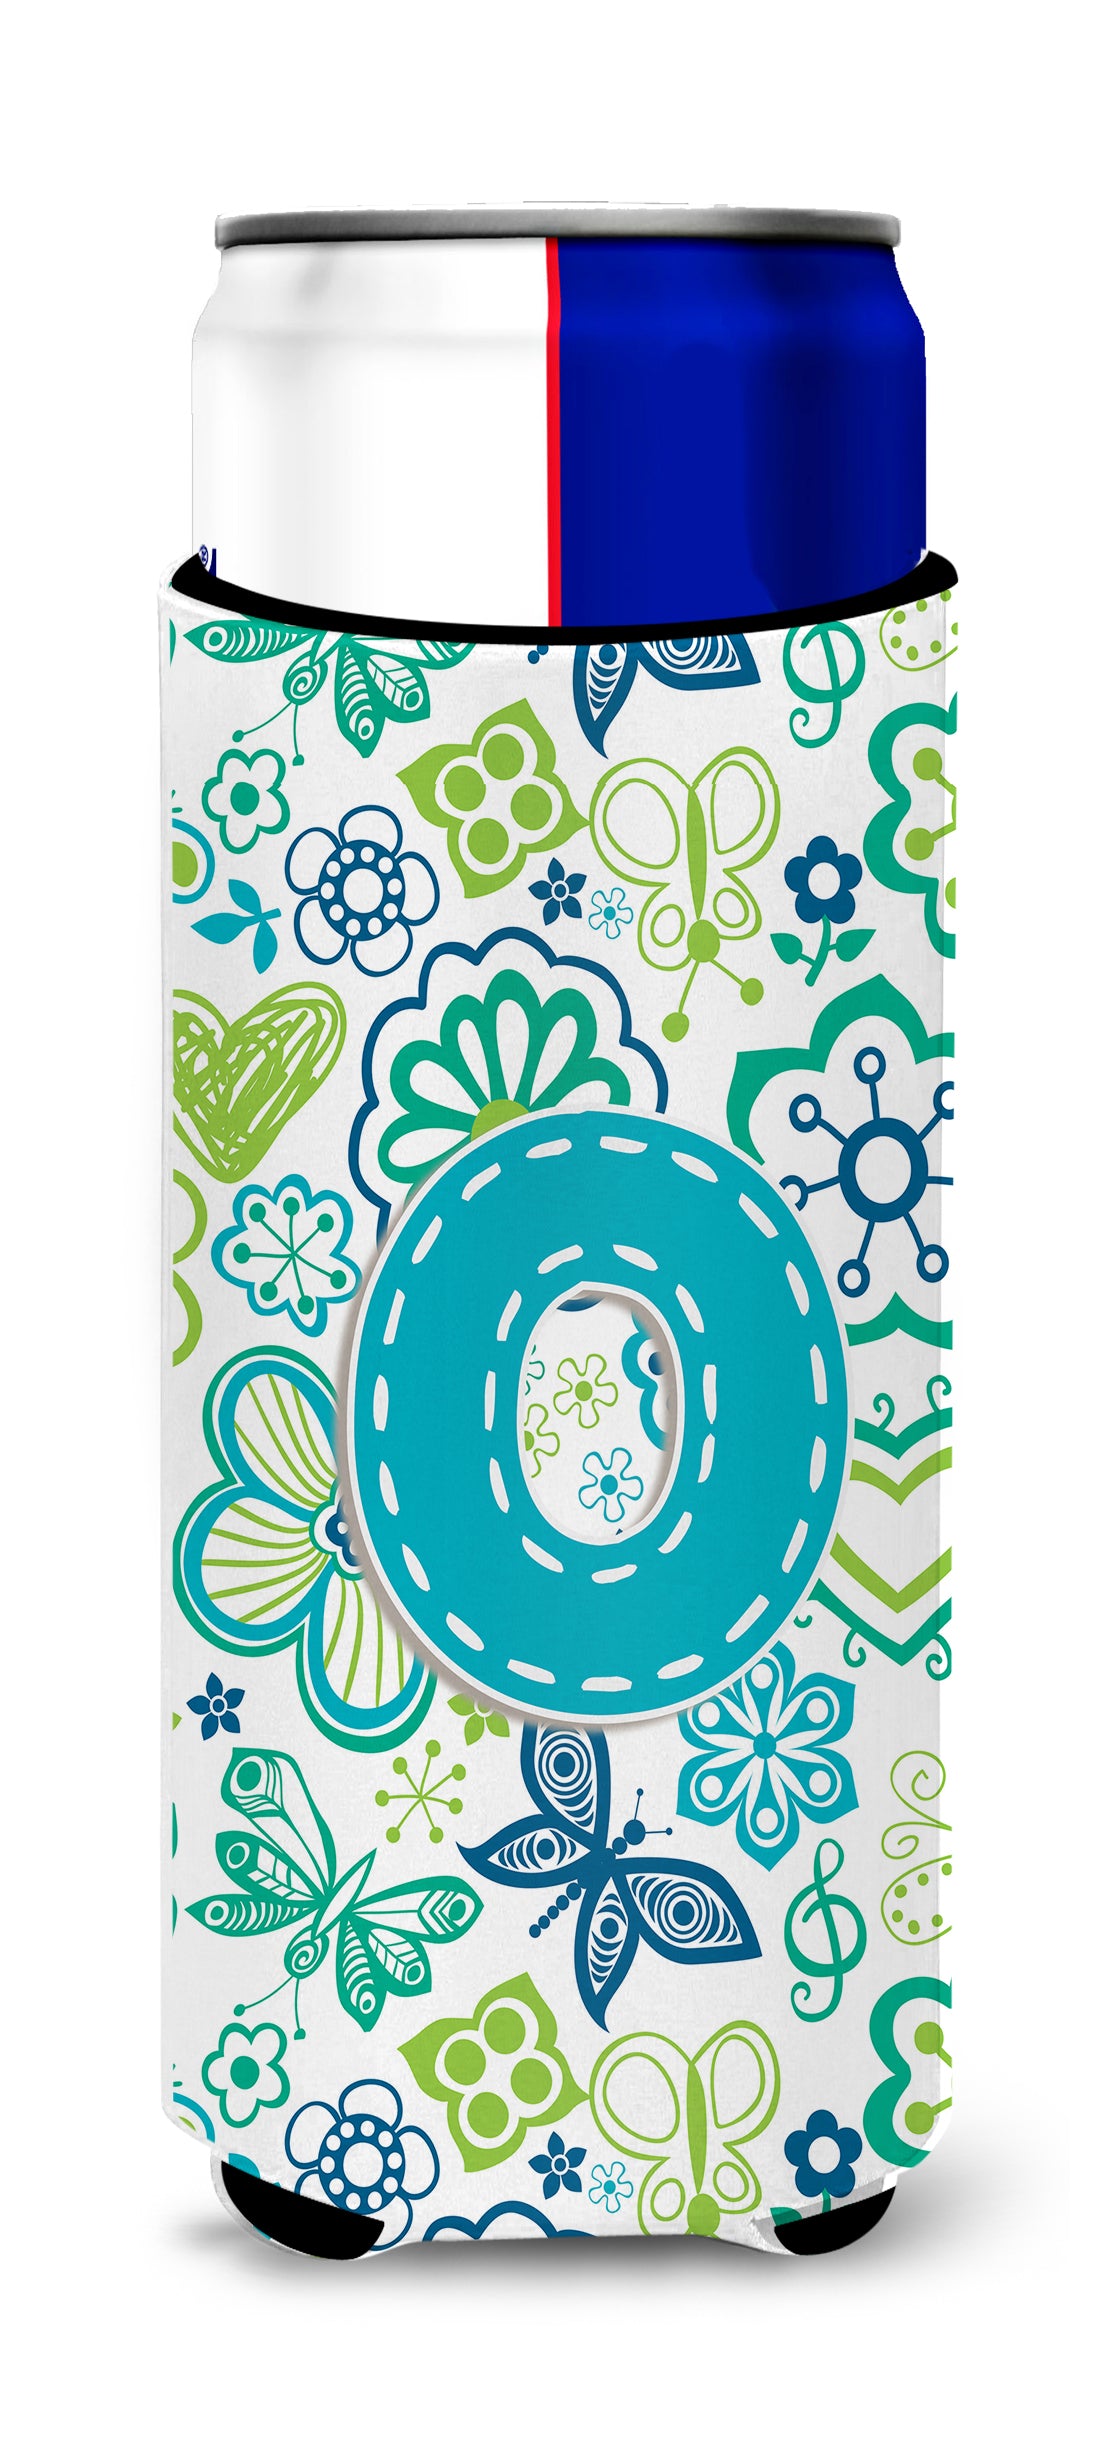 Letter O Flowers and Butterflies Teal Blue Ultra Beverage Insulators for slim cans CJ2006-OMUK.